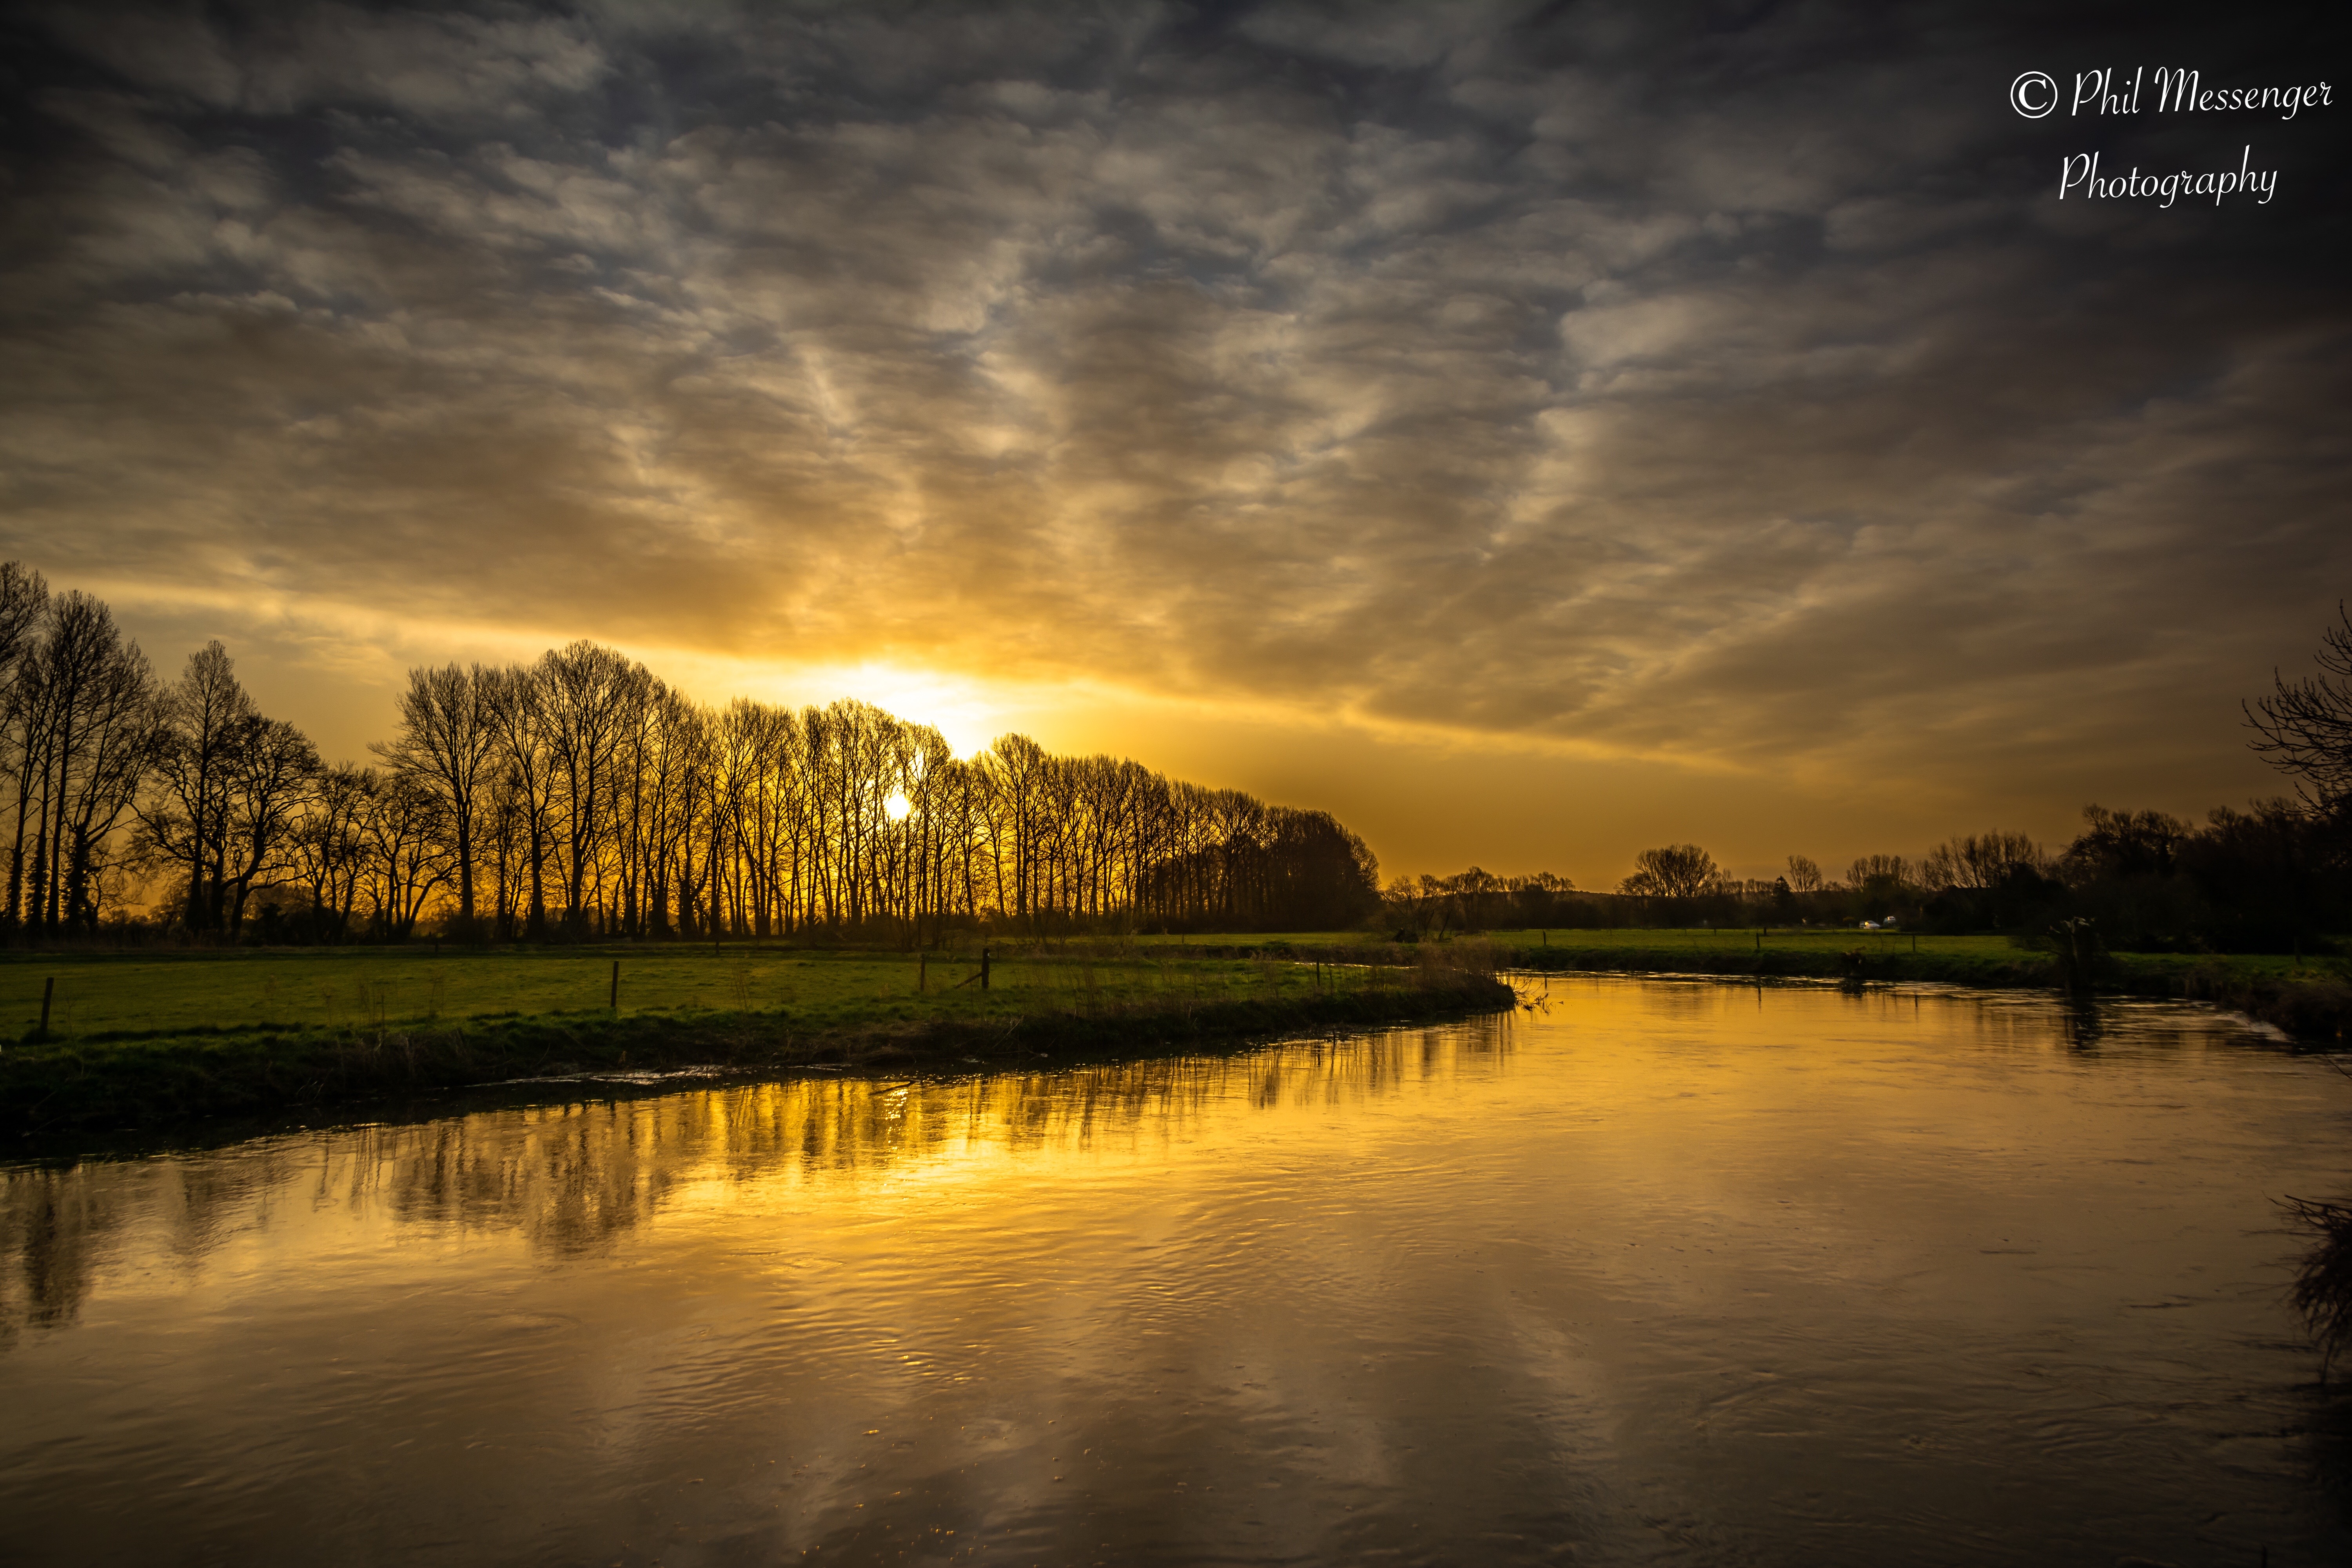 Sunrise on the River Thames, Lechlade, Gloucestershire.